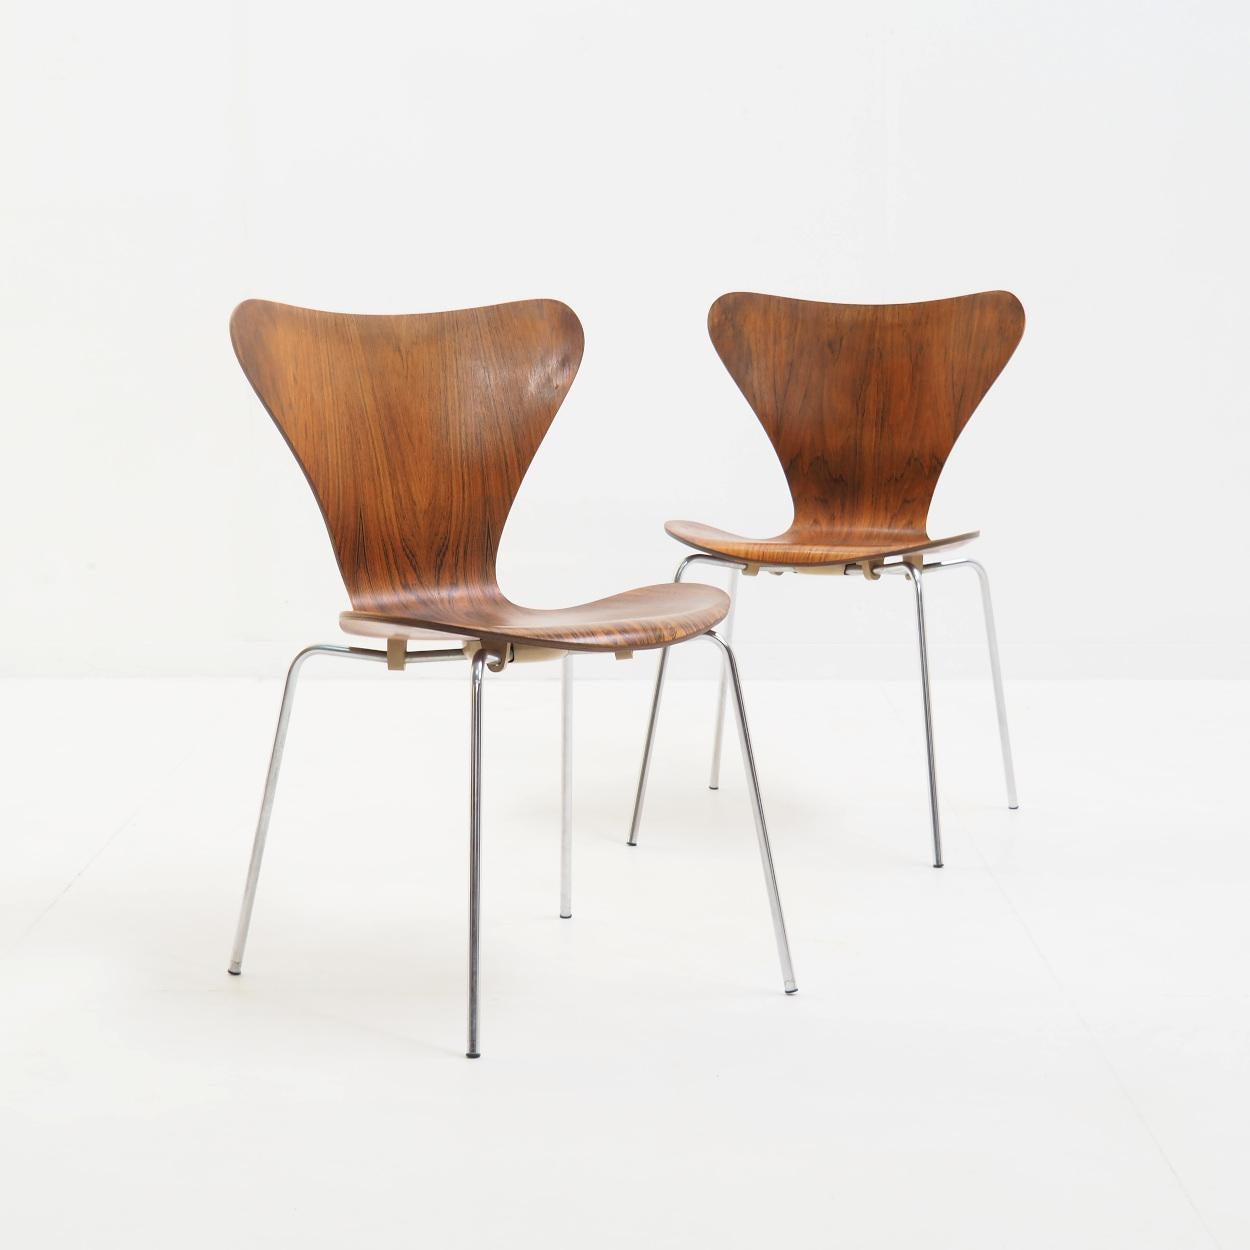 What can I say, one of the most iconic chairs ever in it’s most beautiful appearance. It’s the Model 3107 butterfly chair designed by Arne jacobsen for Fritz Hansen, presented here in patinated rosewood, showing a beautiful colour and drawing of the